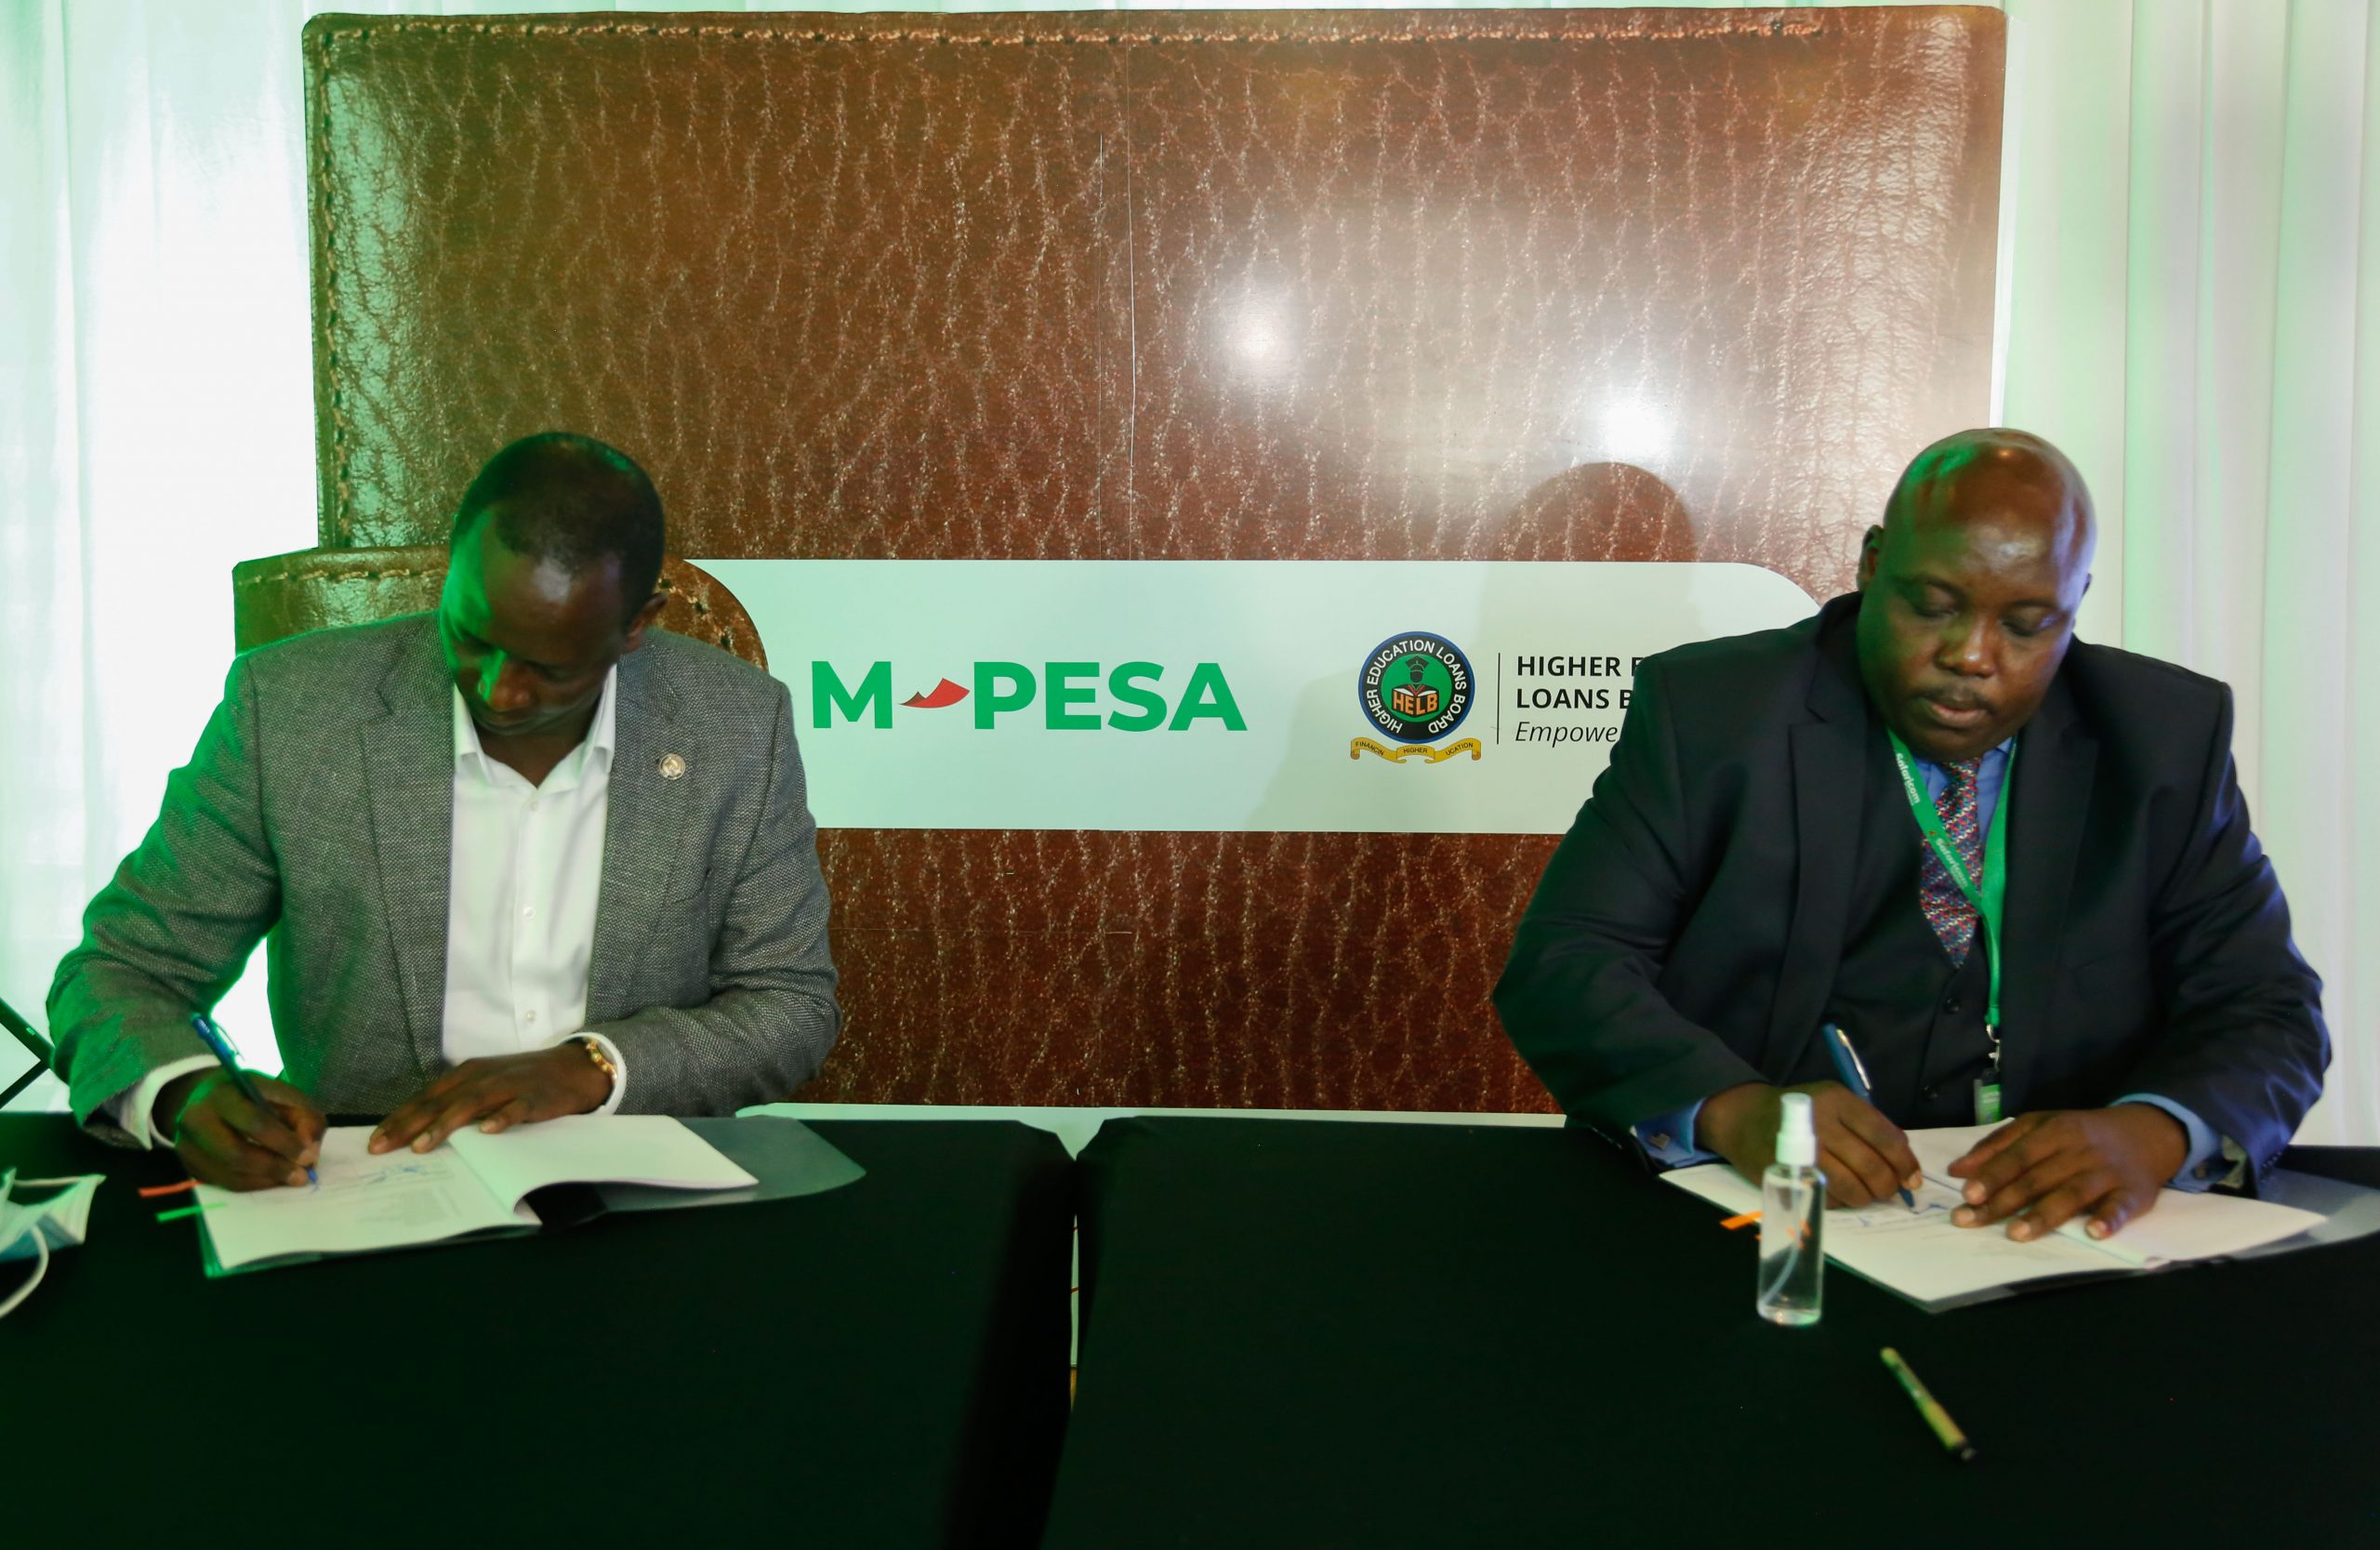 Safaricom and HELB Product Supports M-PESA Disbursement and Repayment